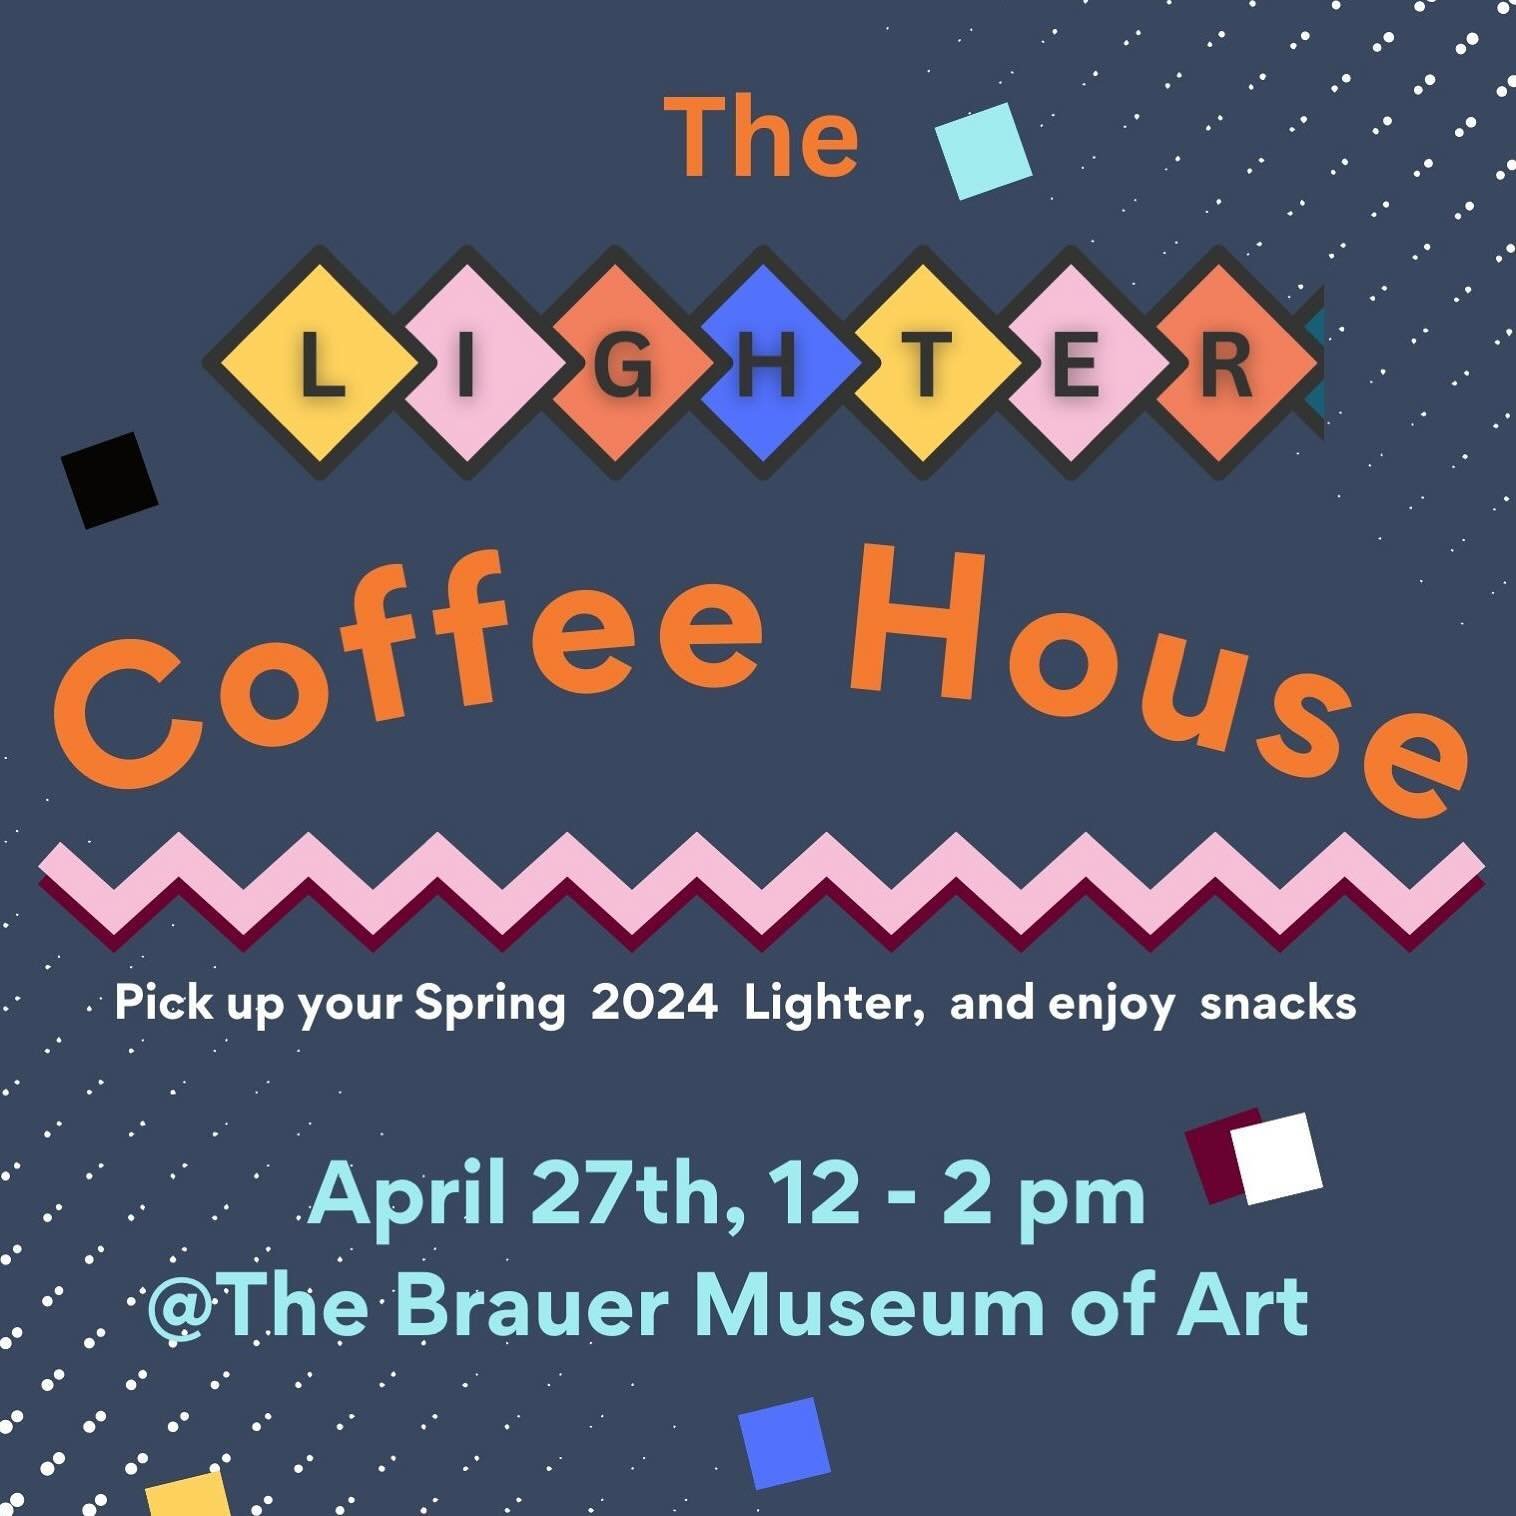 April 27th from 12-2 stop by the @brauer_museum_of_art  to pick up a copy of the spring 2024 Lighter and eat some snacks. 

#TheLighter #coffeehouse #spring2024 #newvolume #art #literature #artlitmagazine